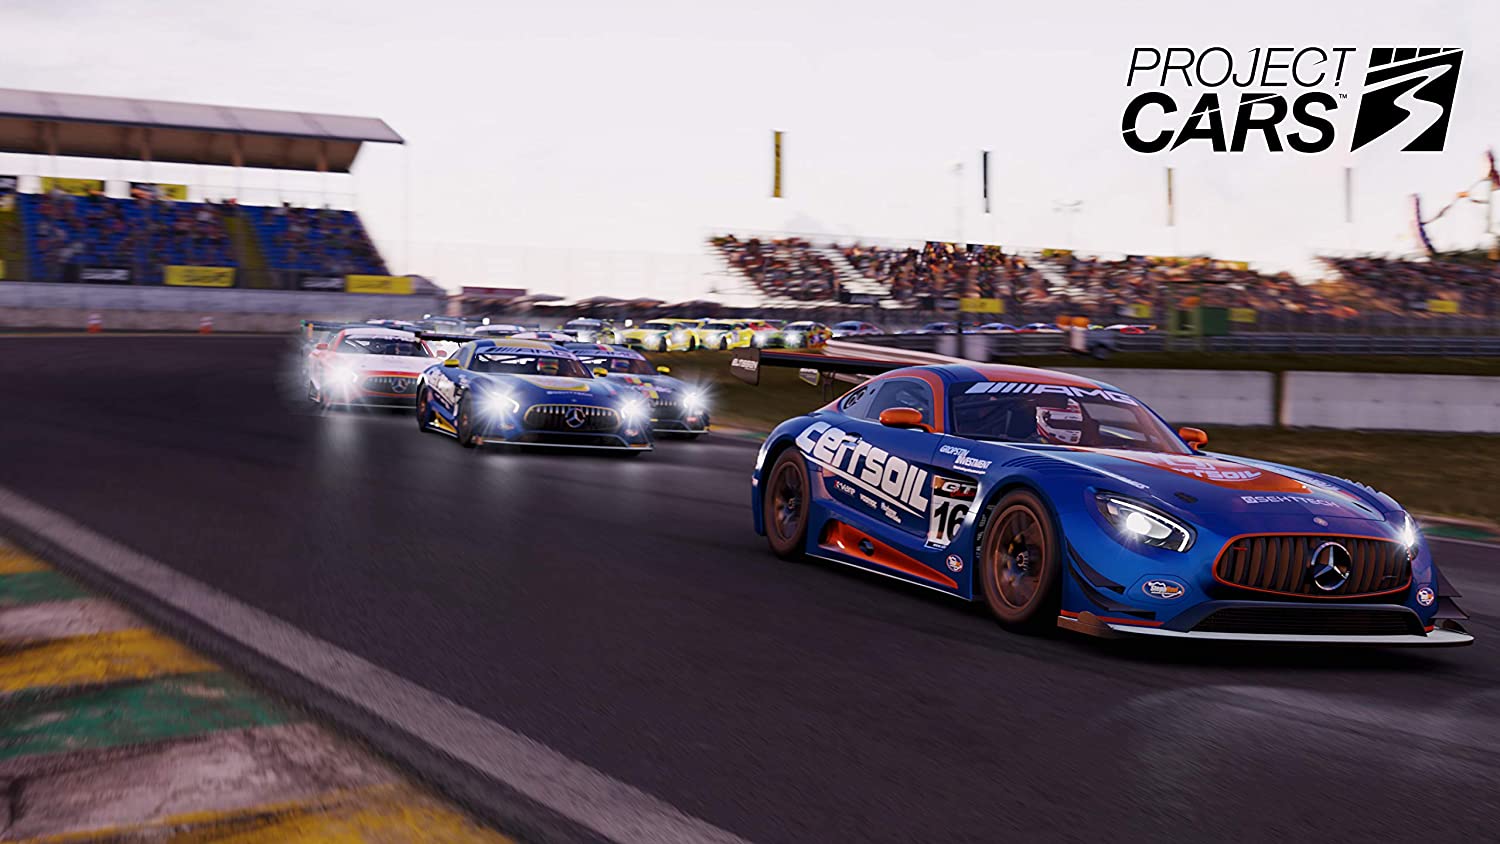 Project Cars 3 (Playstation 4 / PS4) Your Ultimate Driver Journey